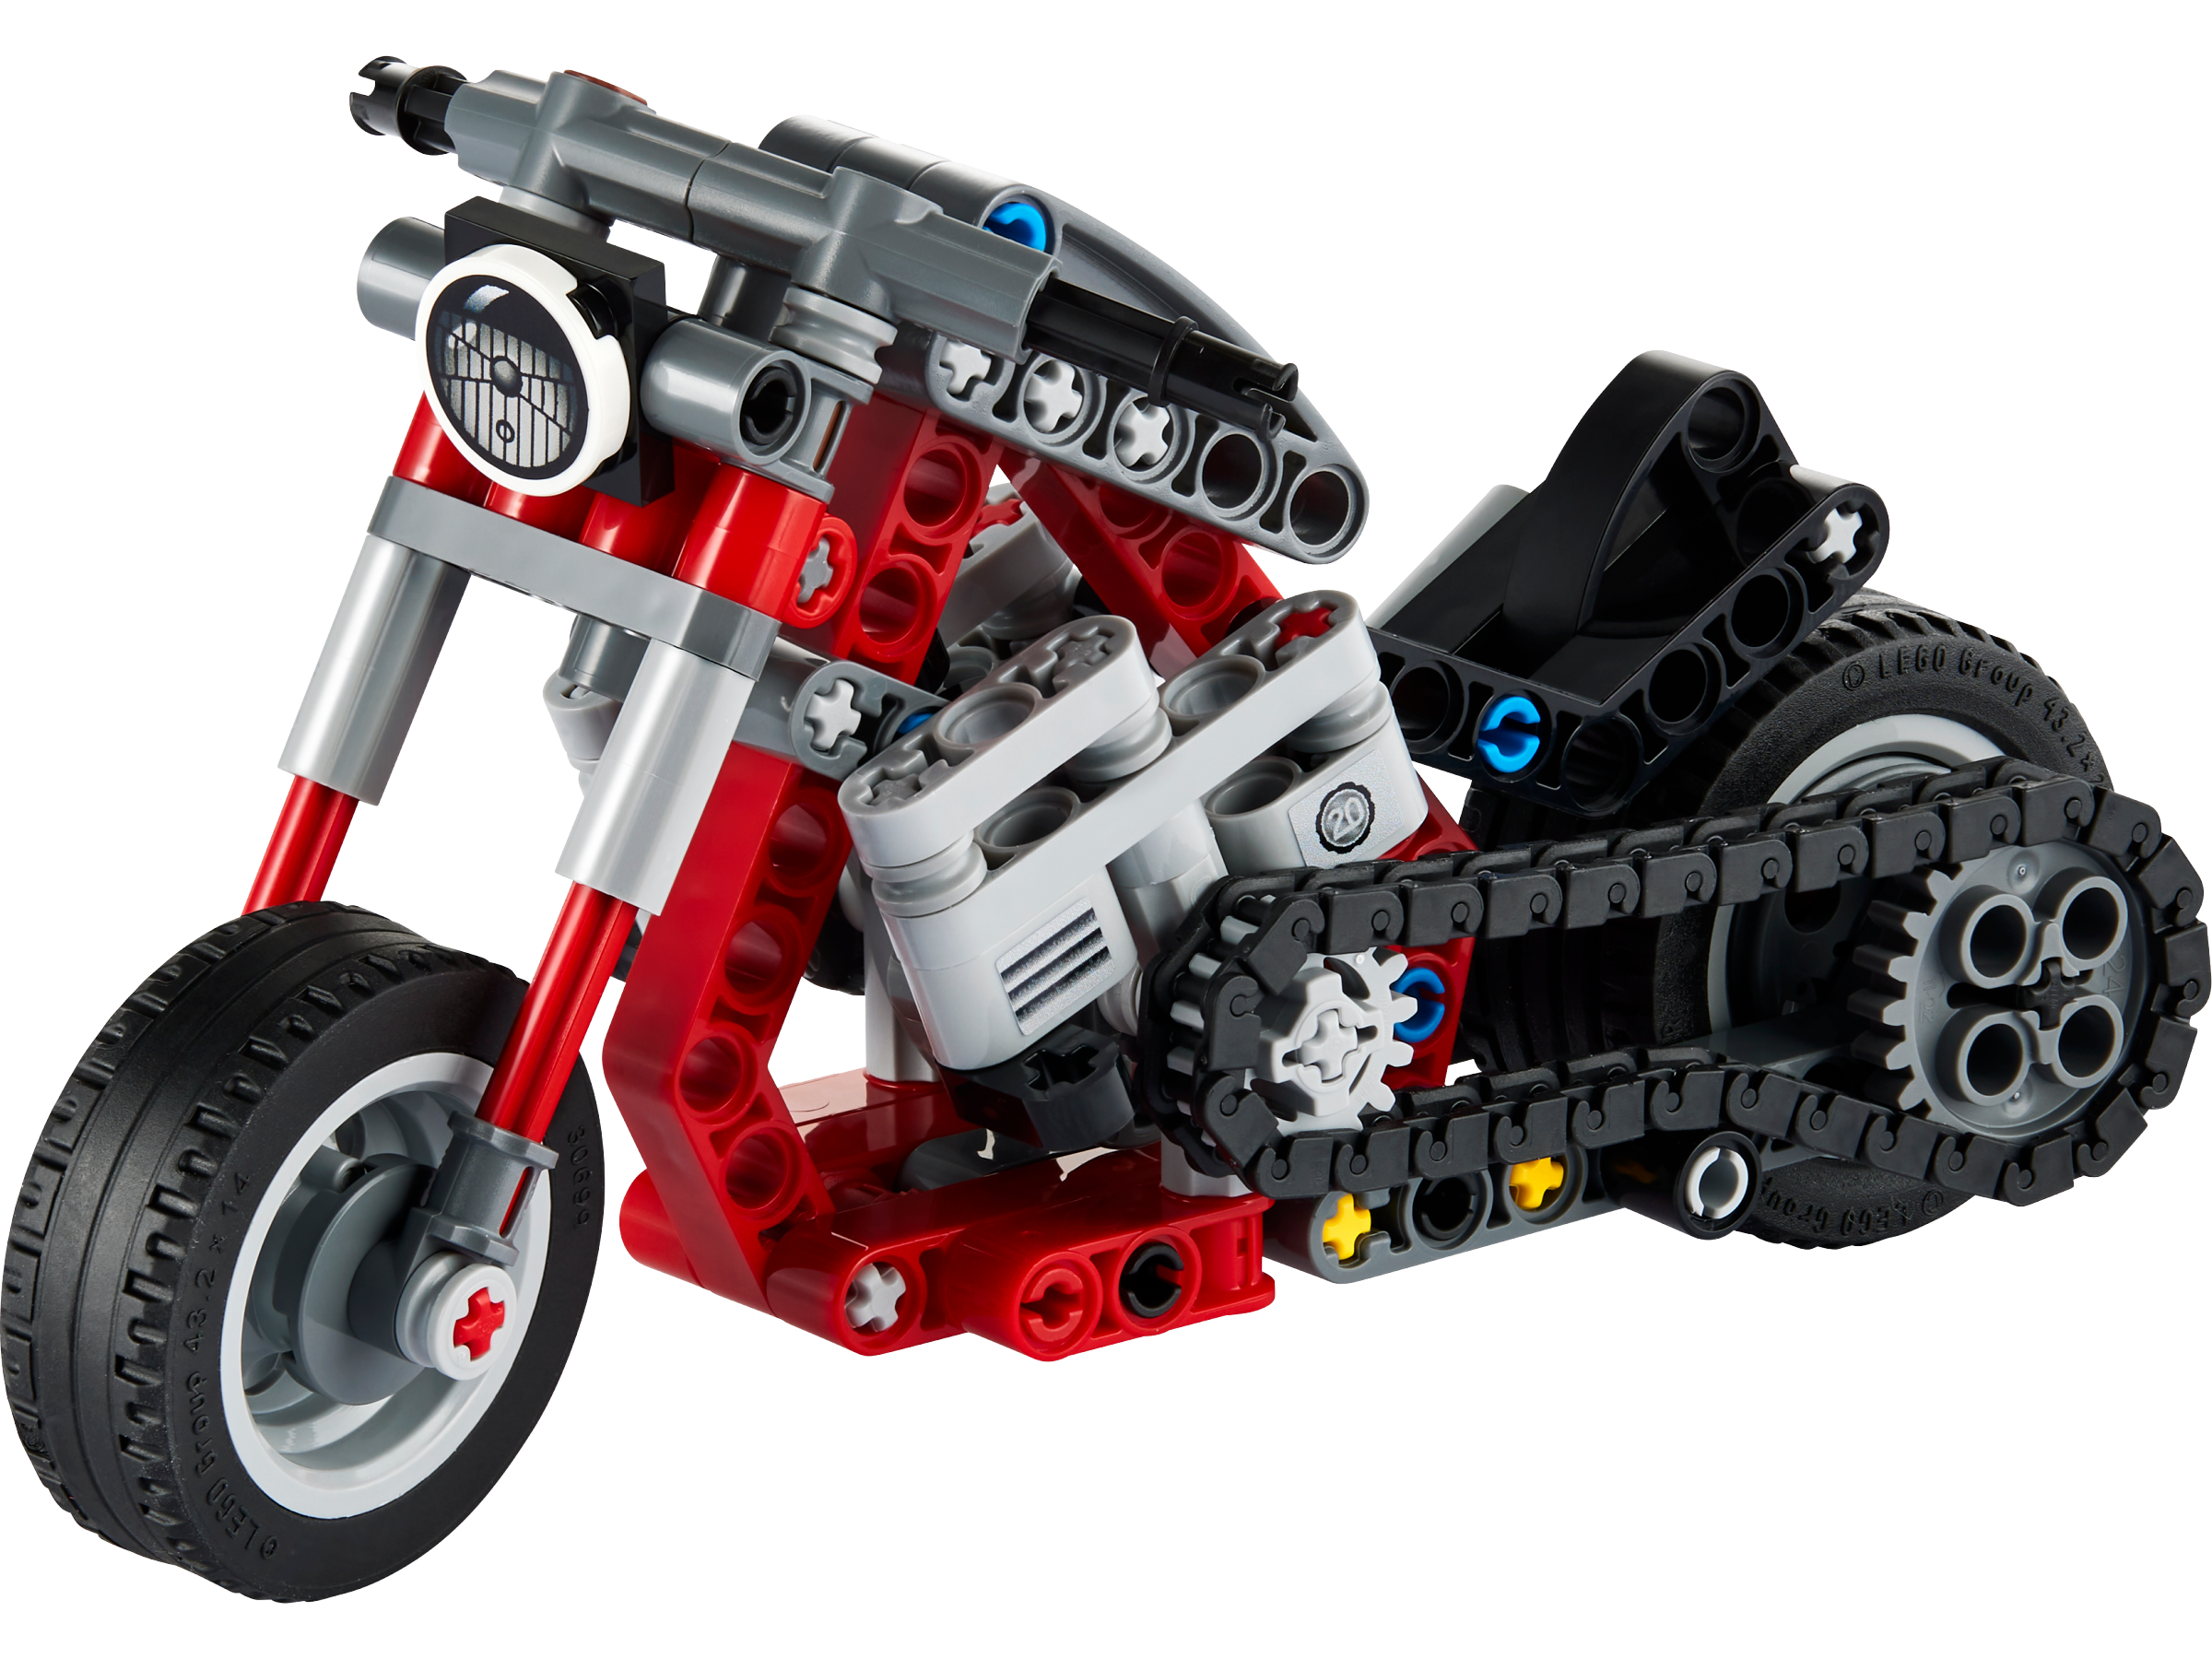 Motorcycle 42132 | Technic™ online the Official LEGO® Shop US